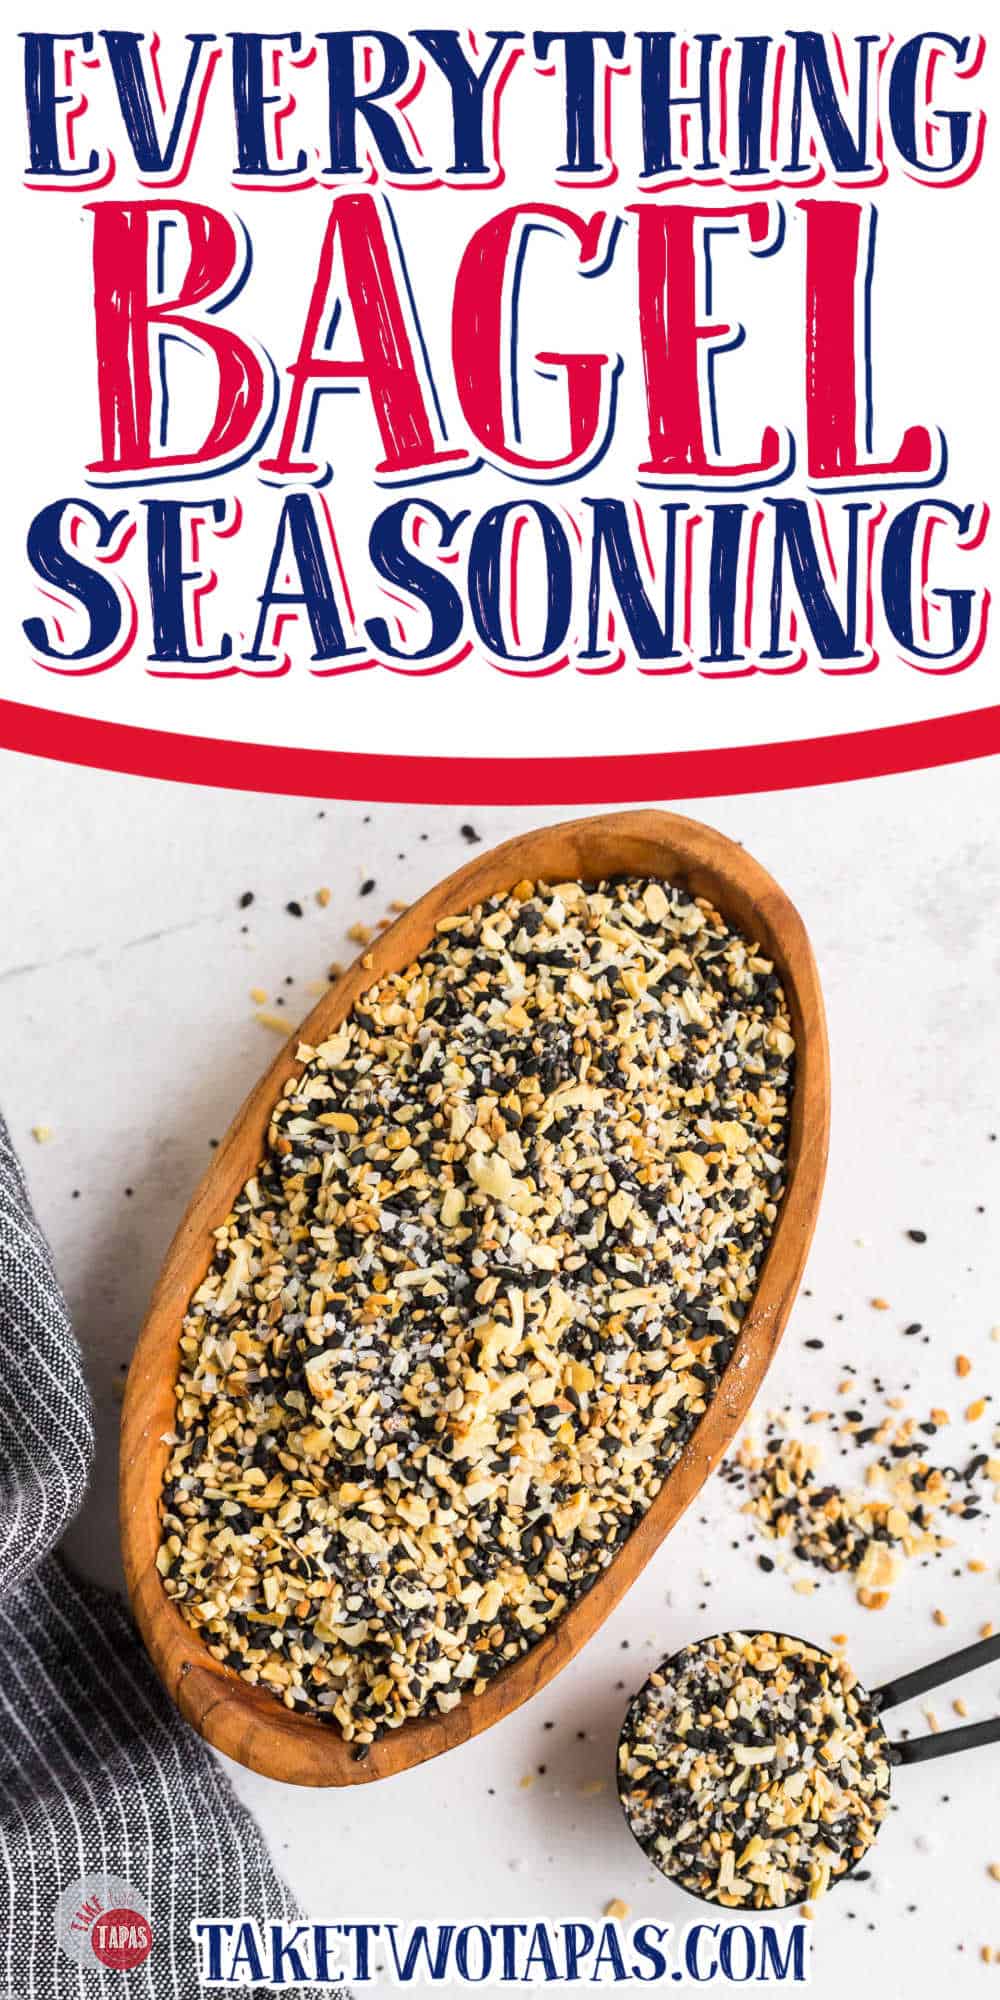 bowl of seasoning with tablespoon